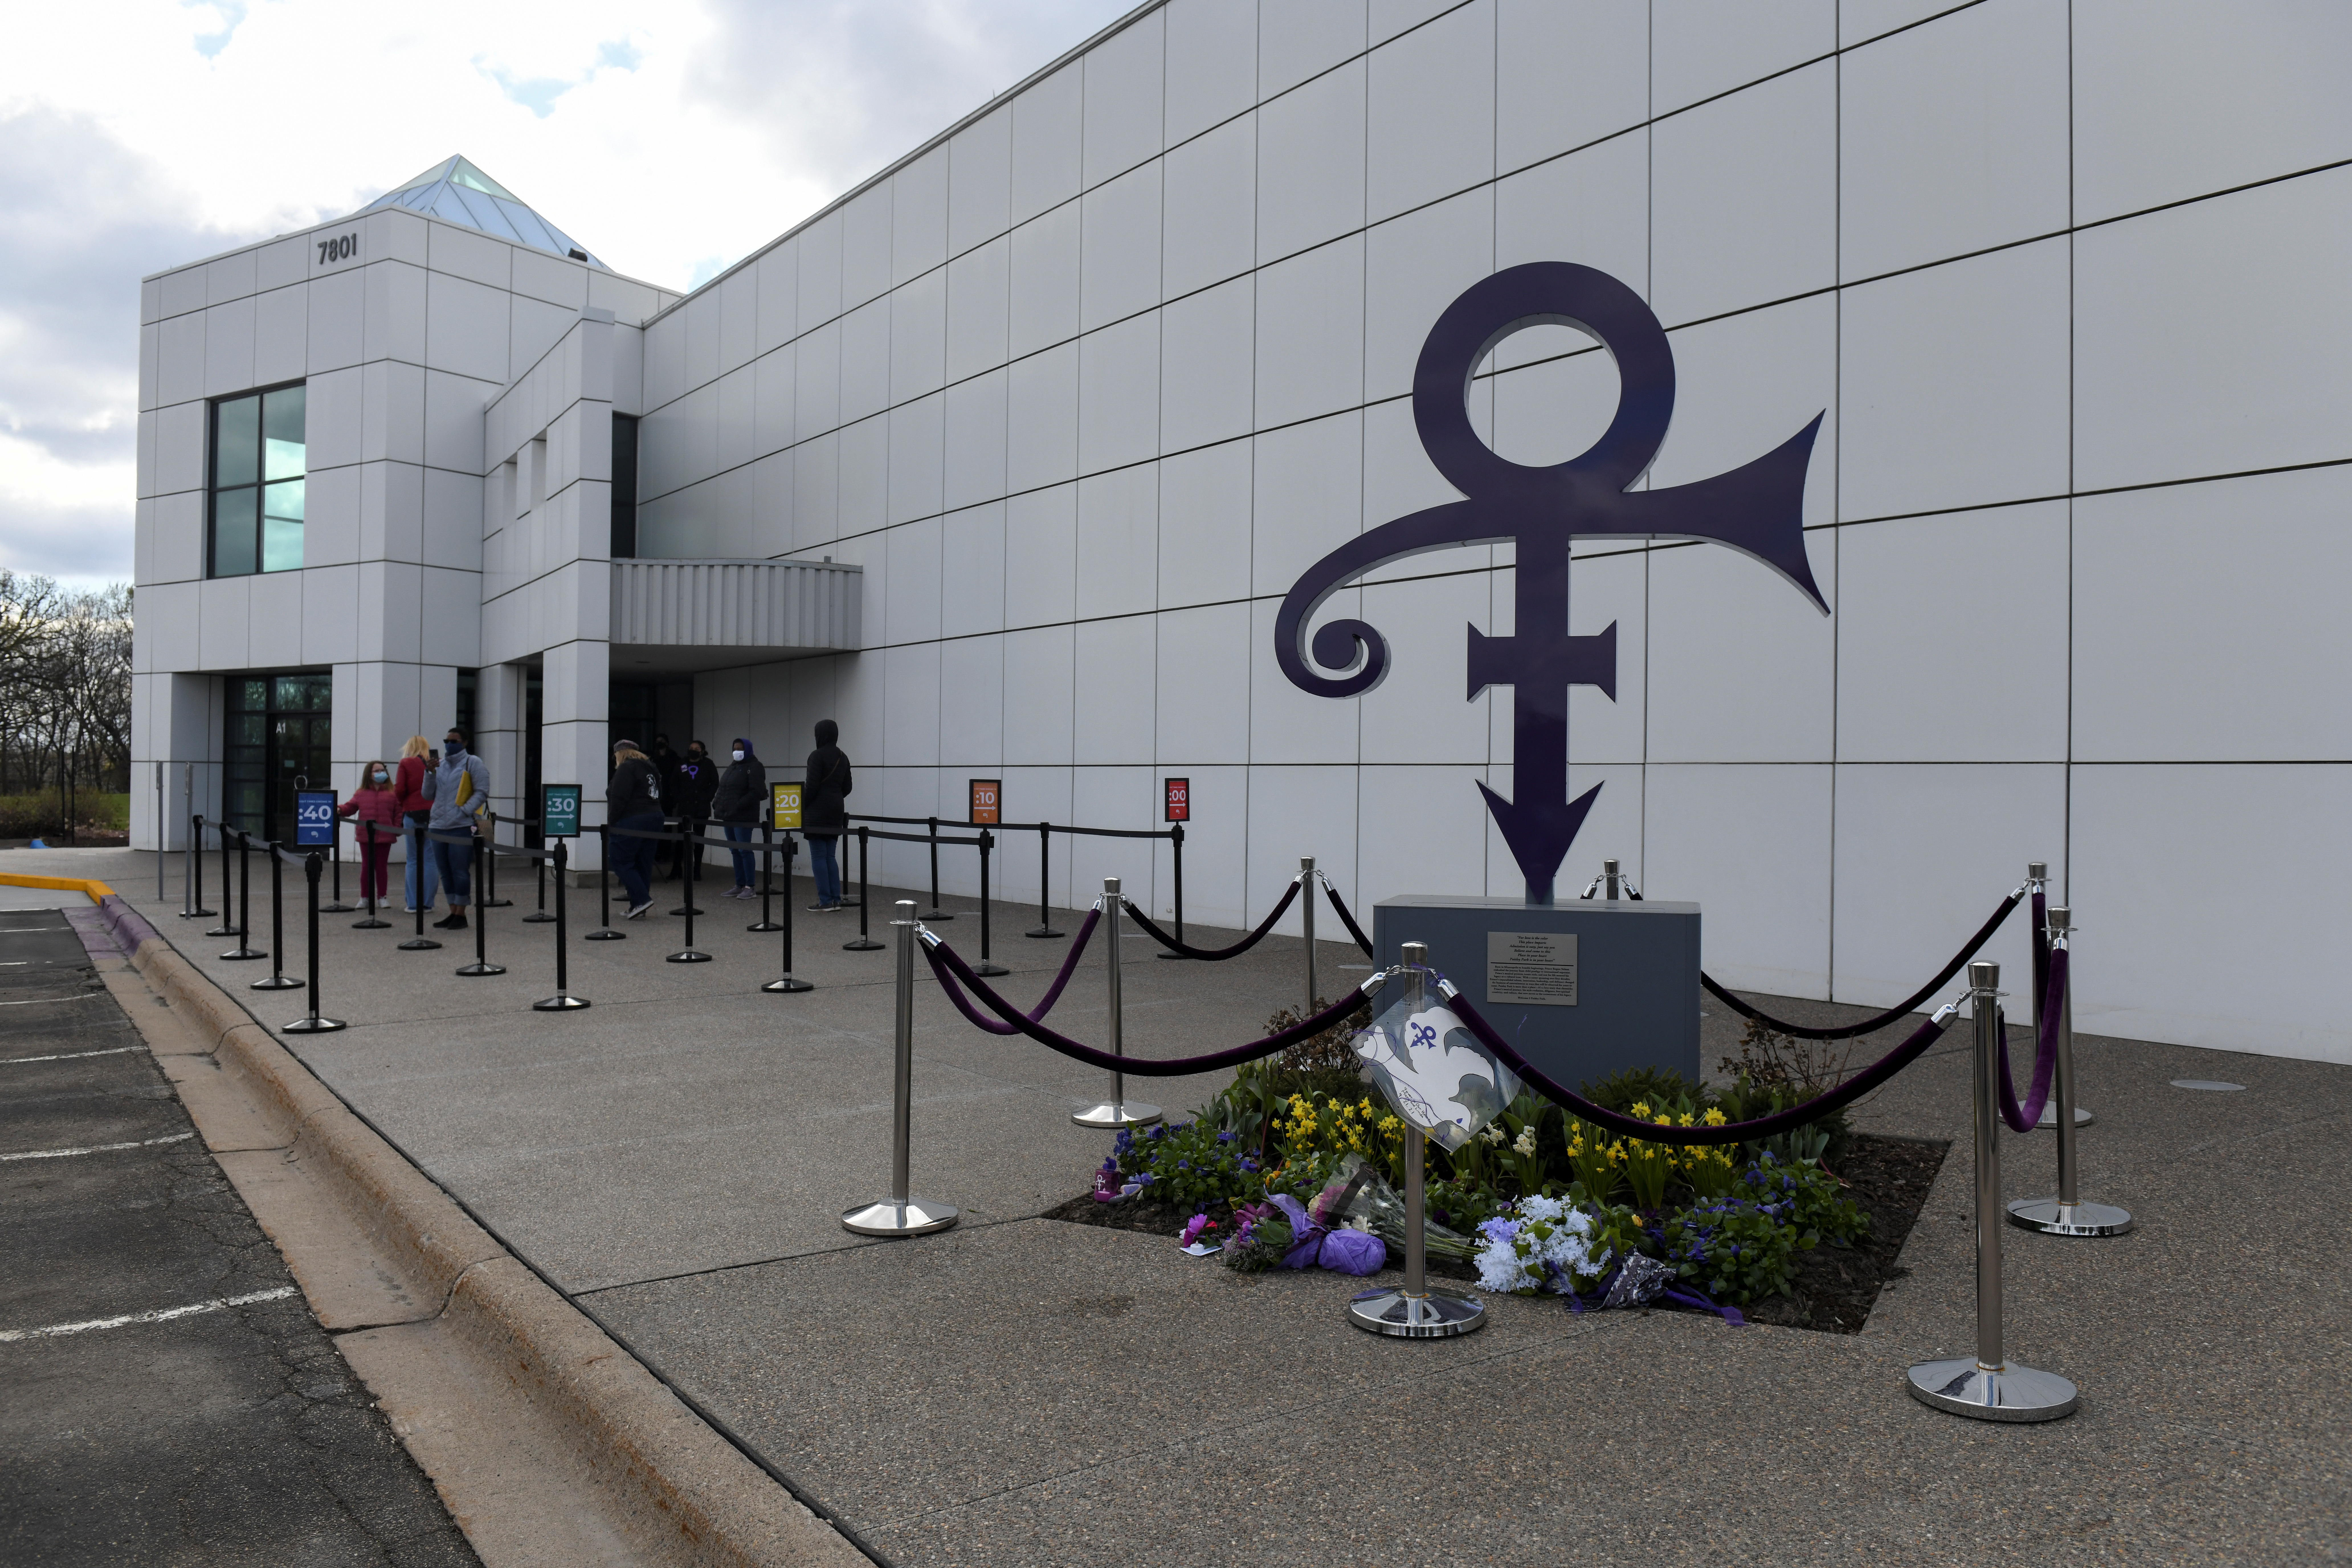 Five years after the death of Prince, fans gather at his Paisley Park estate